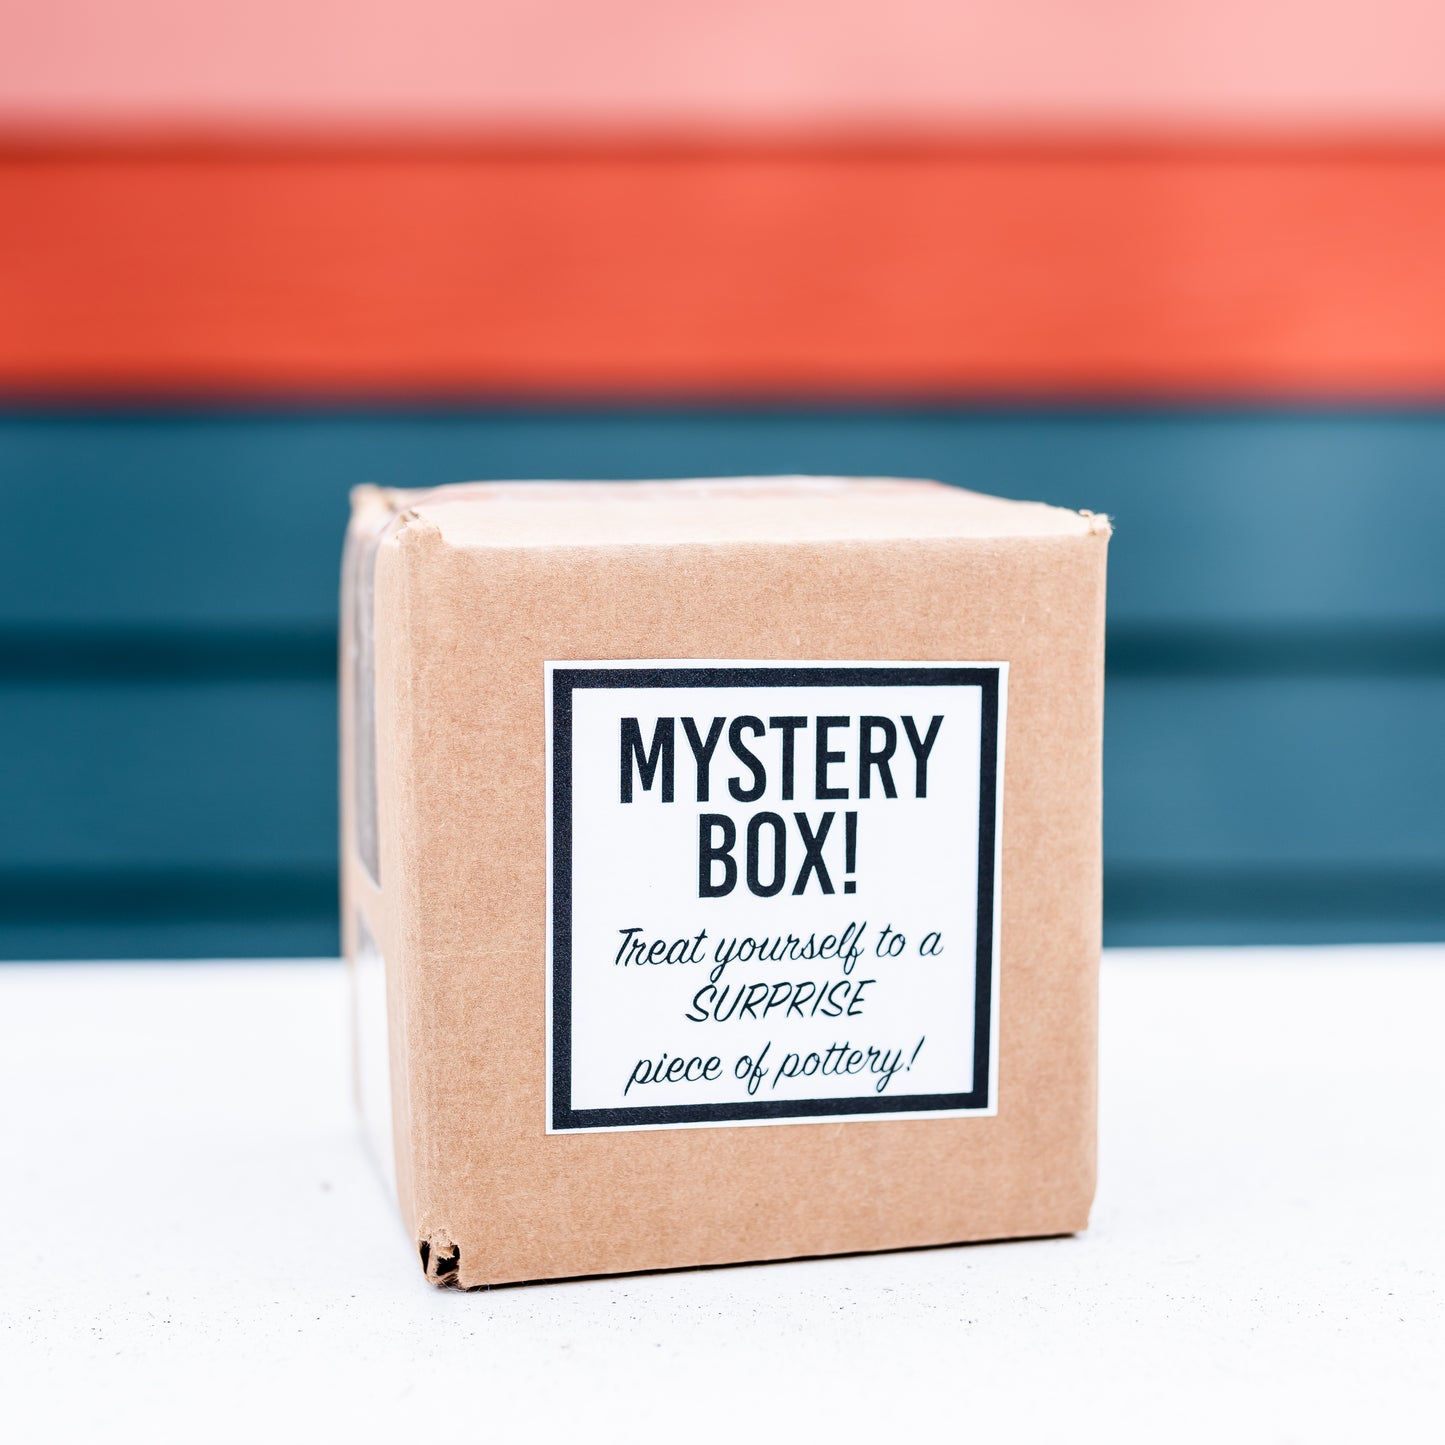 Mystery box (or chime or candle or ring dish or ornament)